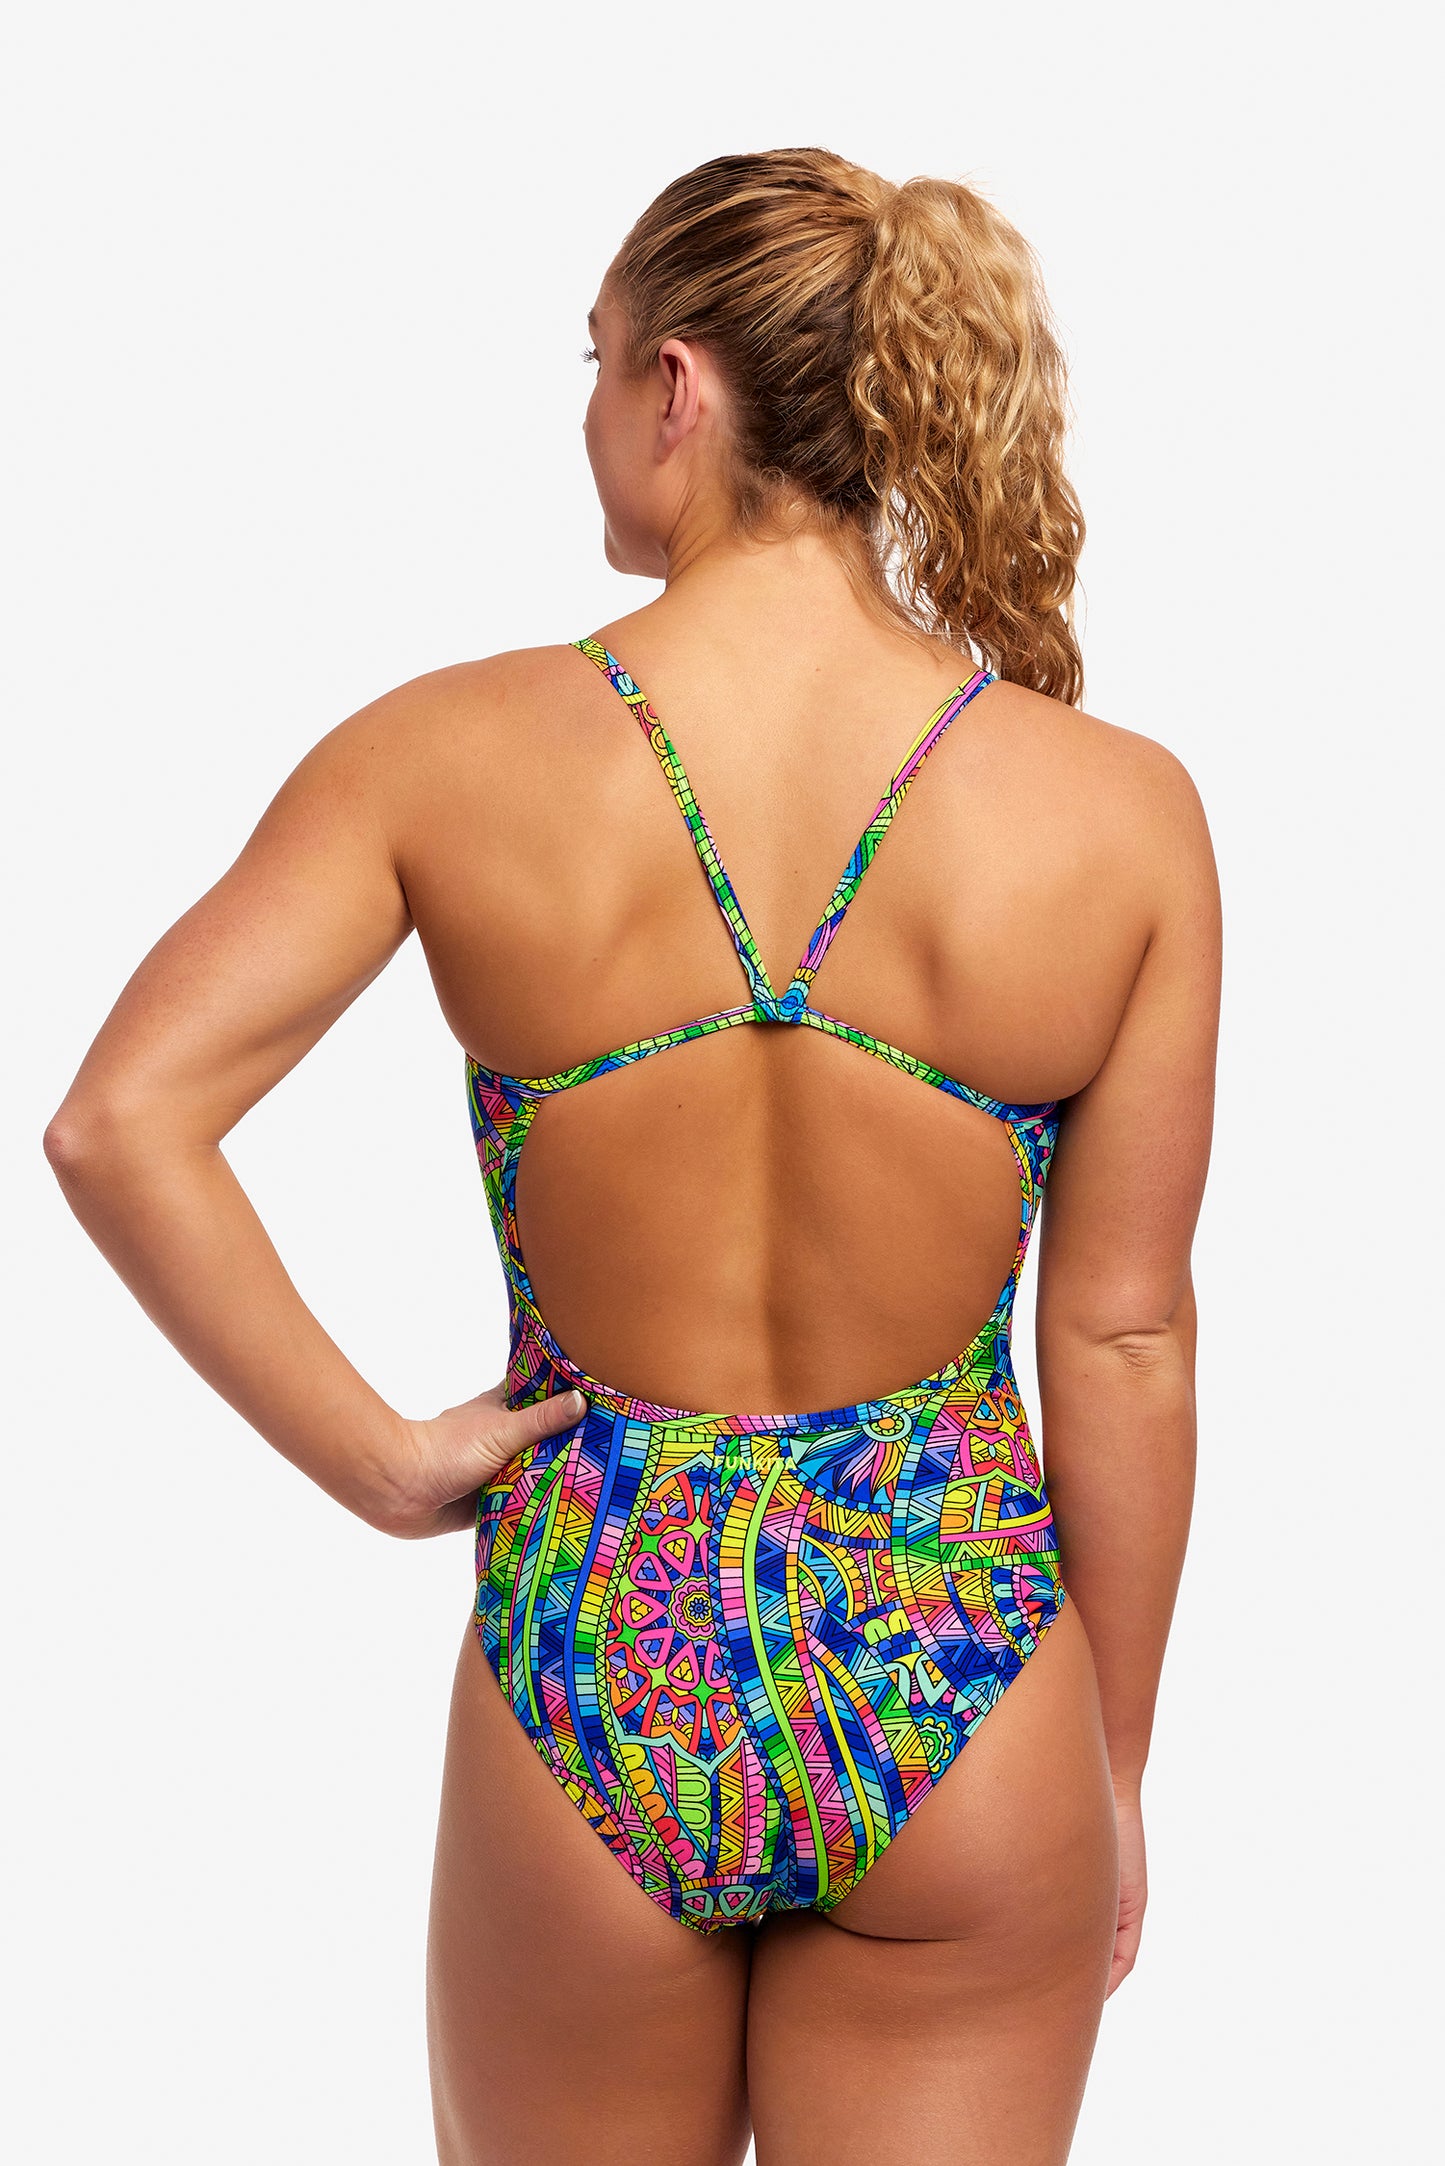 Funkita Ladies Single Strap One Piece Spin The Bottle